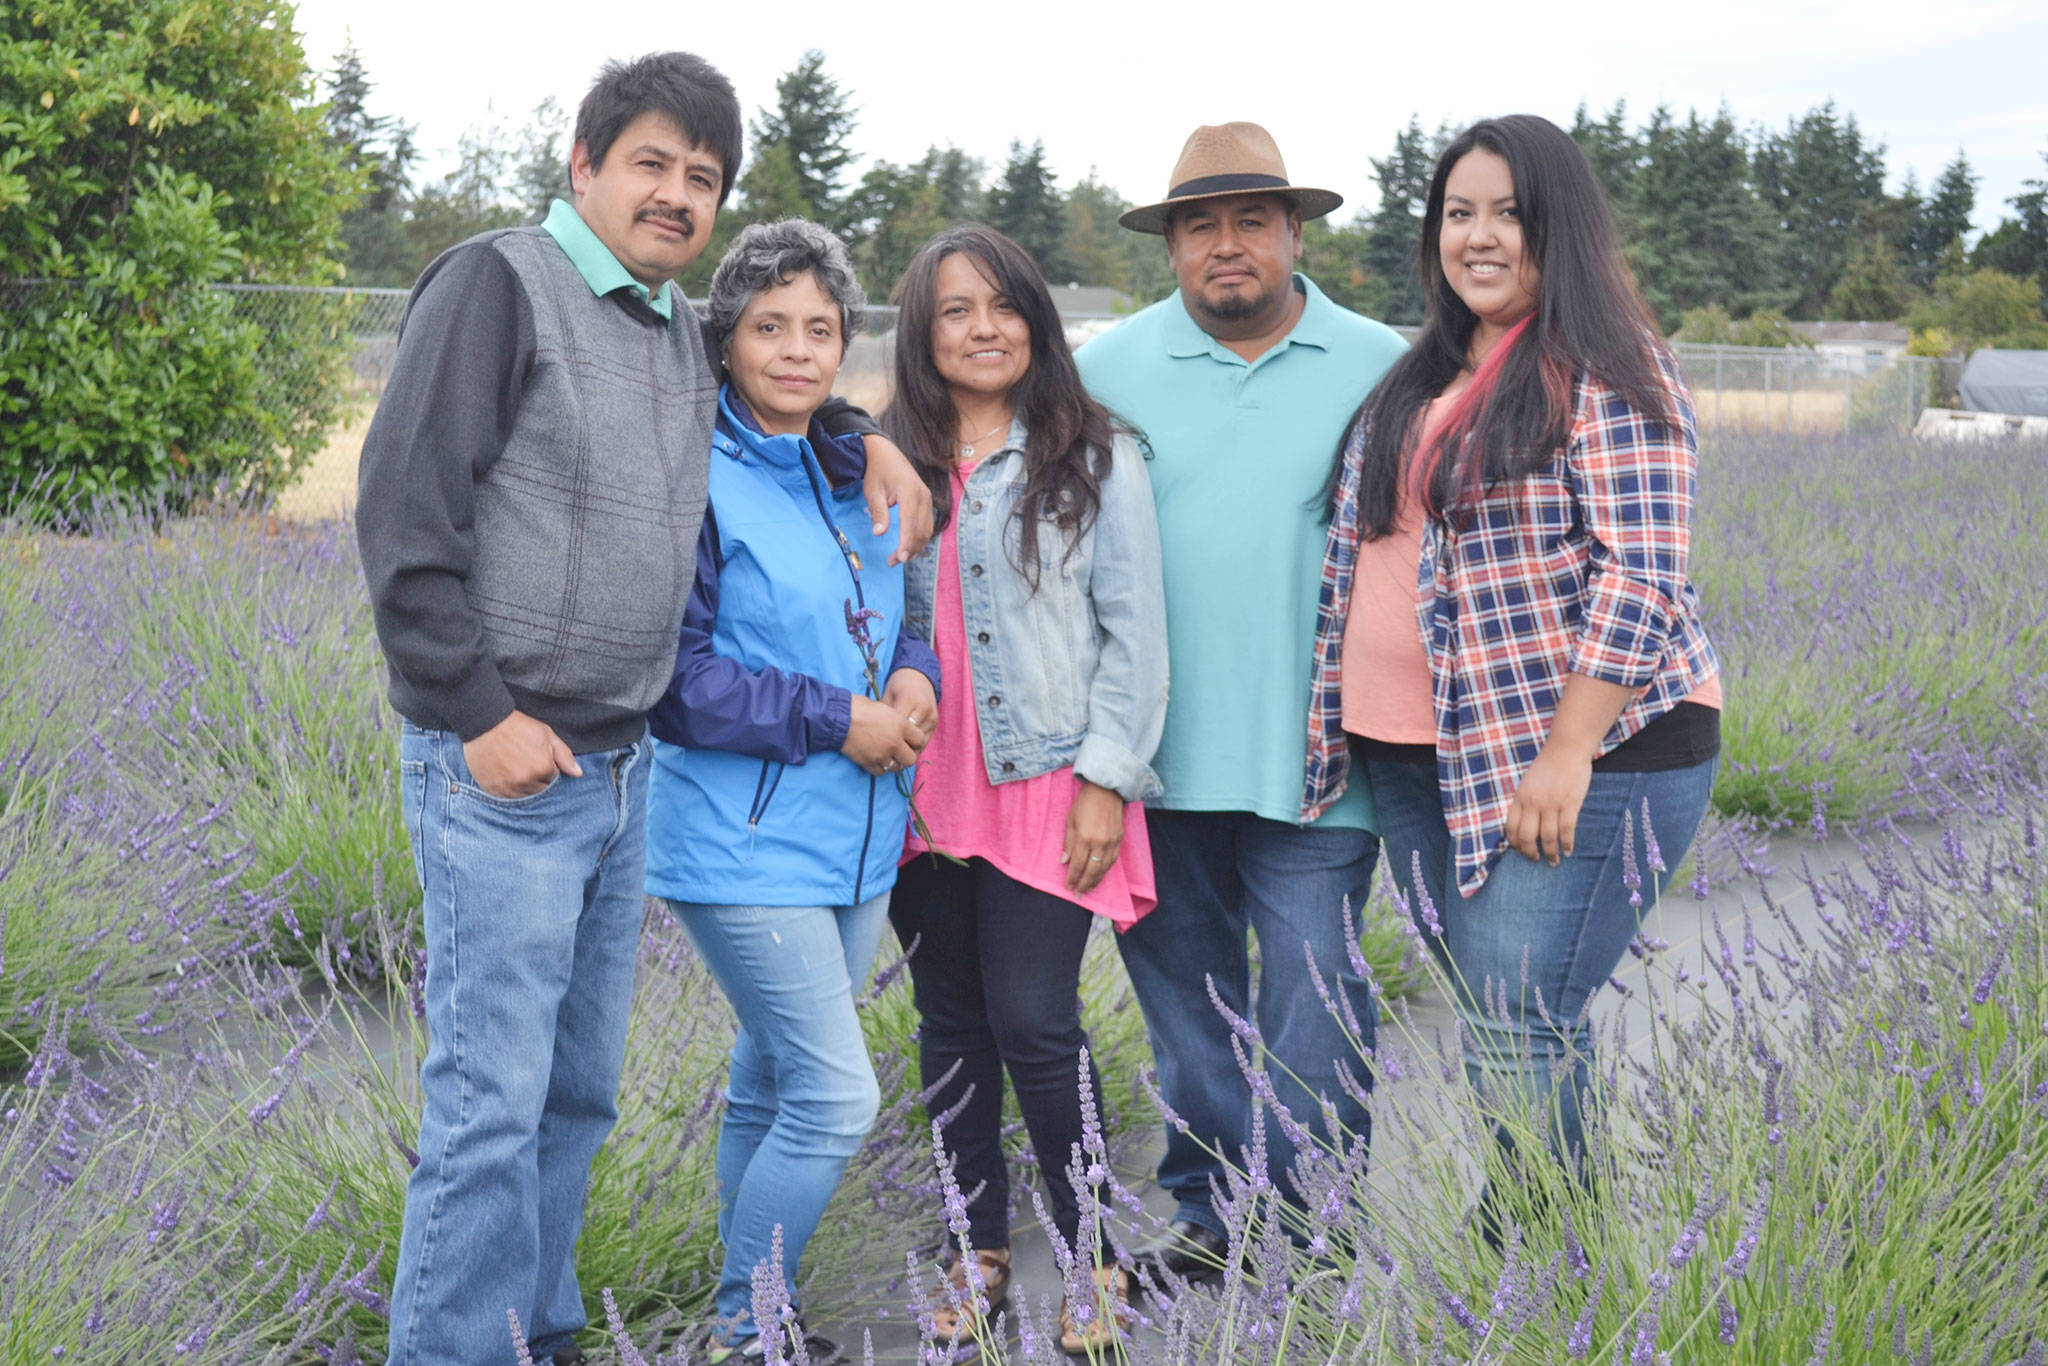 Victor and Maribel Gonzalez, left, partnered with Sergio Gonzalez, fourth from left, and his wife Monica and daughter Melissa to start Meli’s Lavender Farm off Old Olympic Highway. With Victor’s lavender plants and Sergio’s property, they plan to sell the lavender to support Melissa’s college education at Western Washington University. (Matthew Nash/Olympic Peninsula News Group)